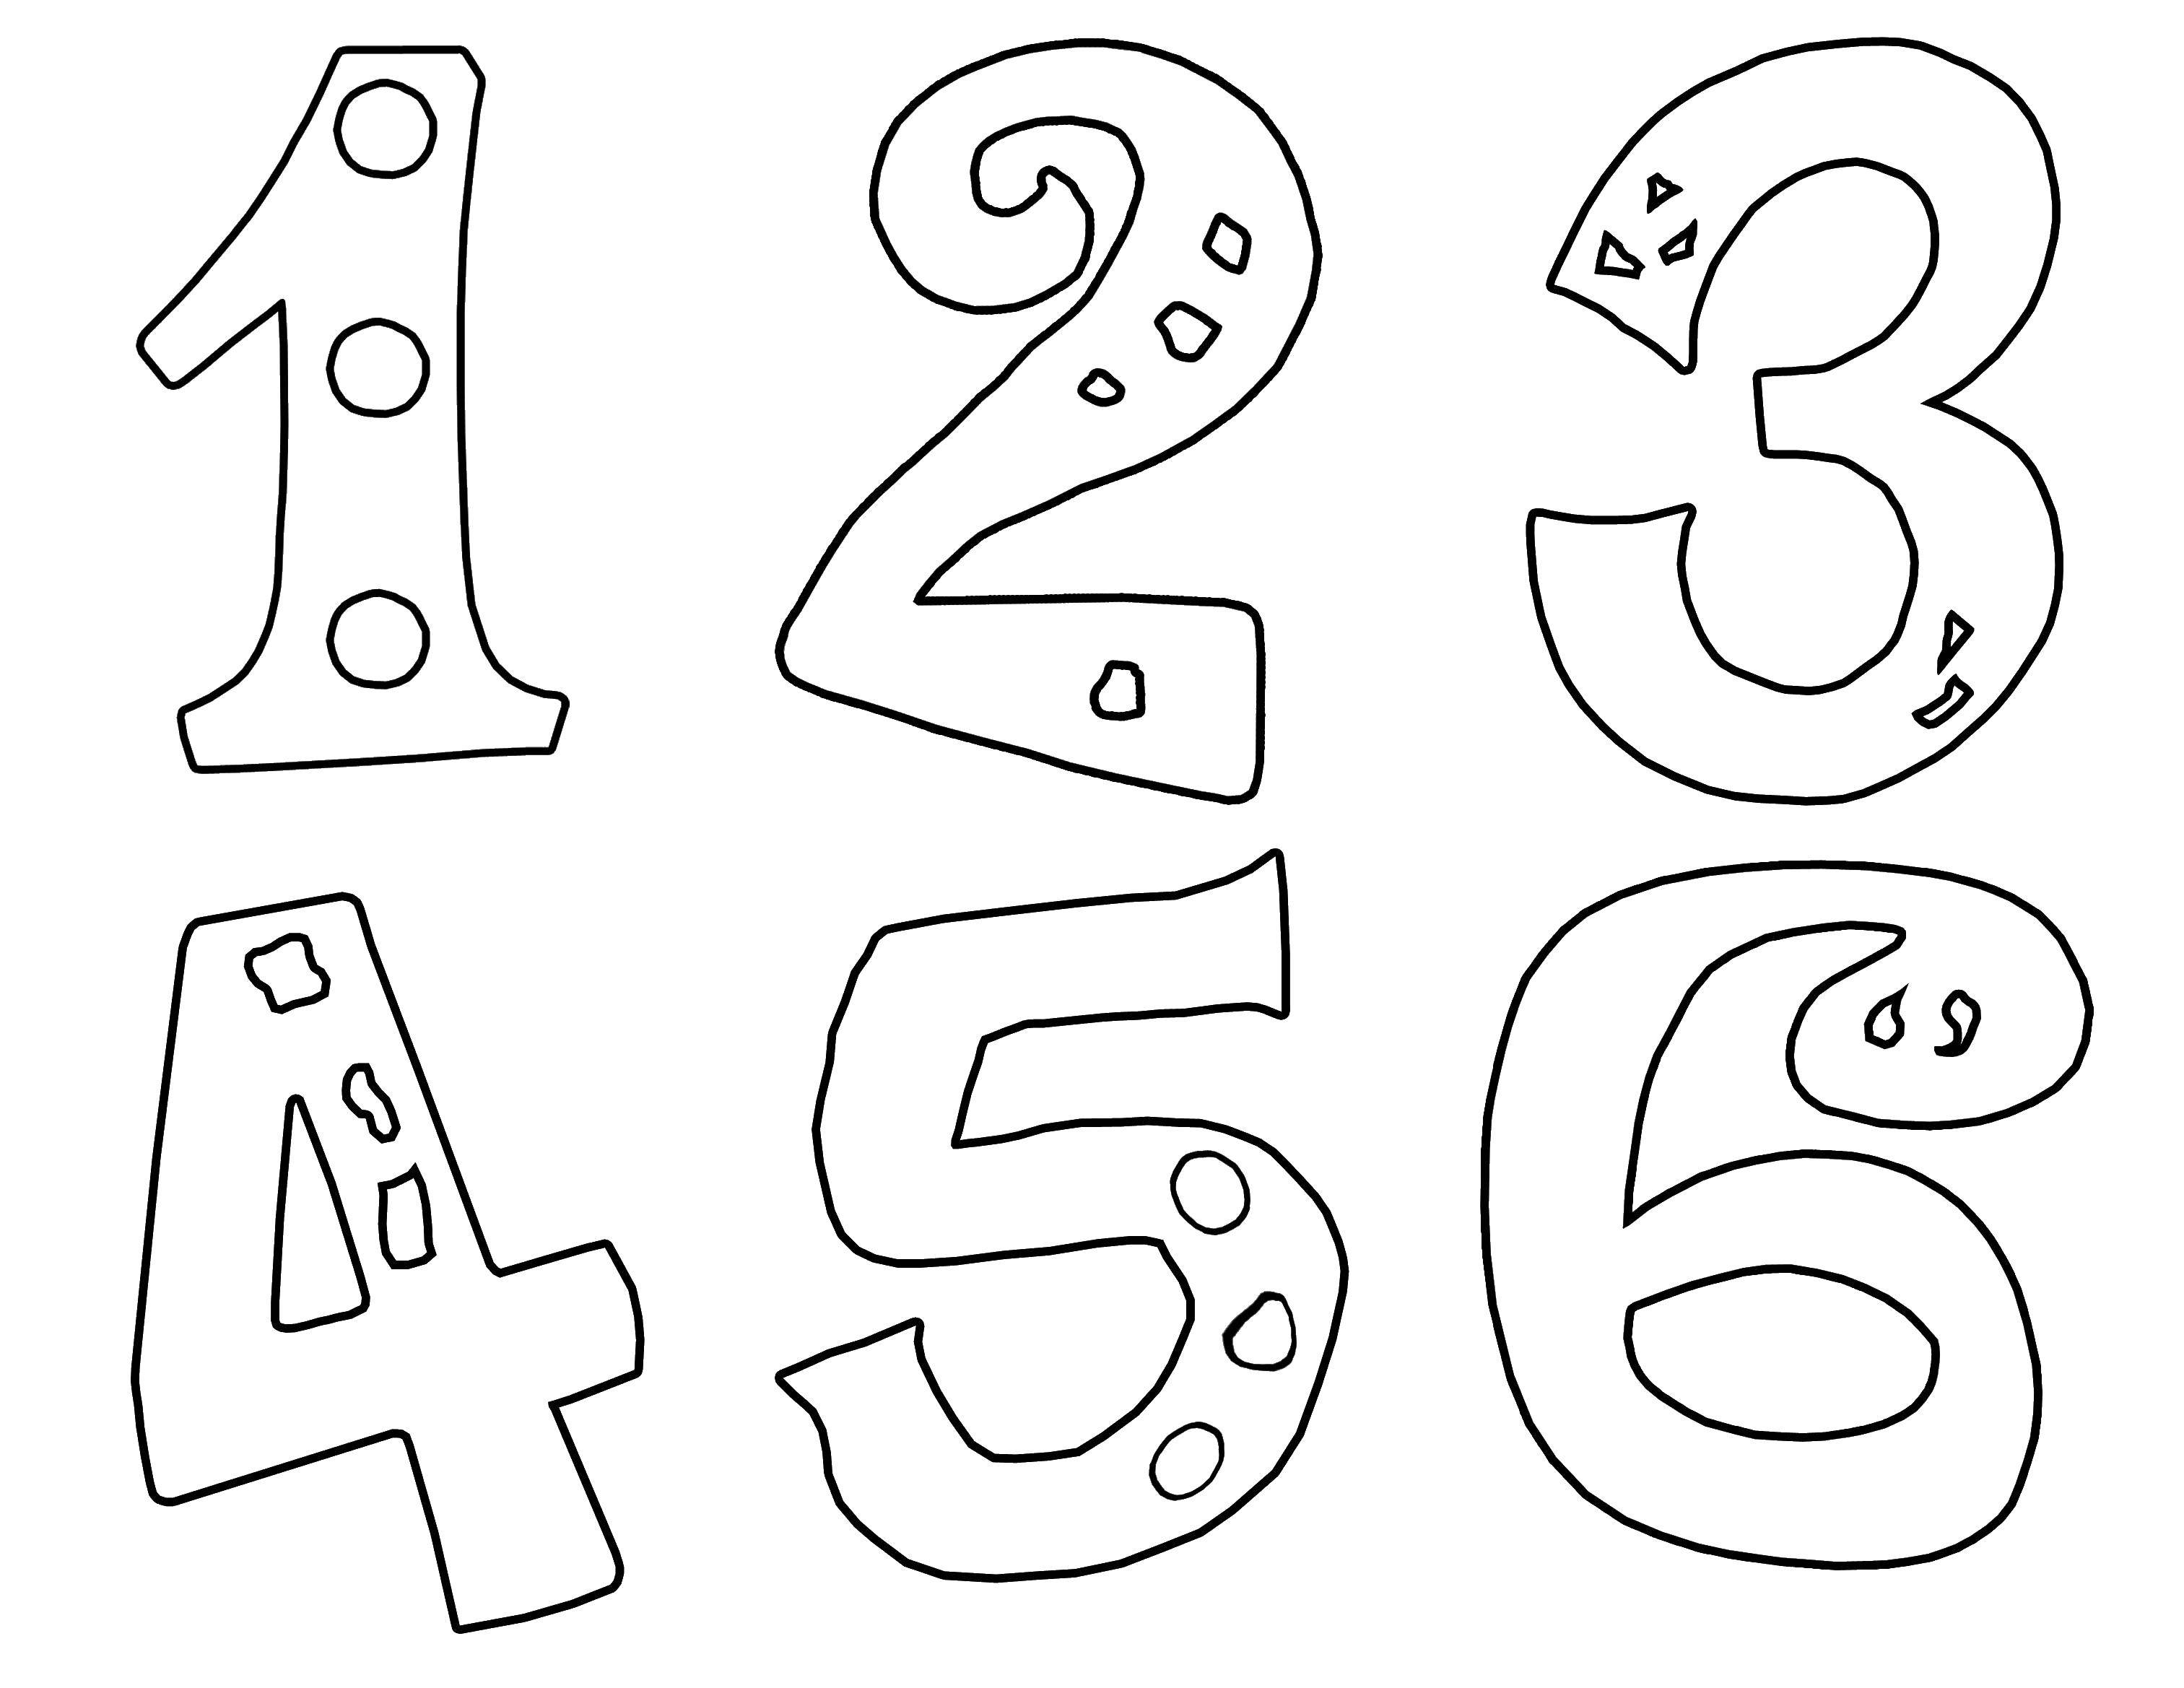 Coloring The numbers. Category Numbers. Tags:  Numbers , account numbers.